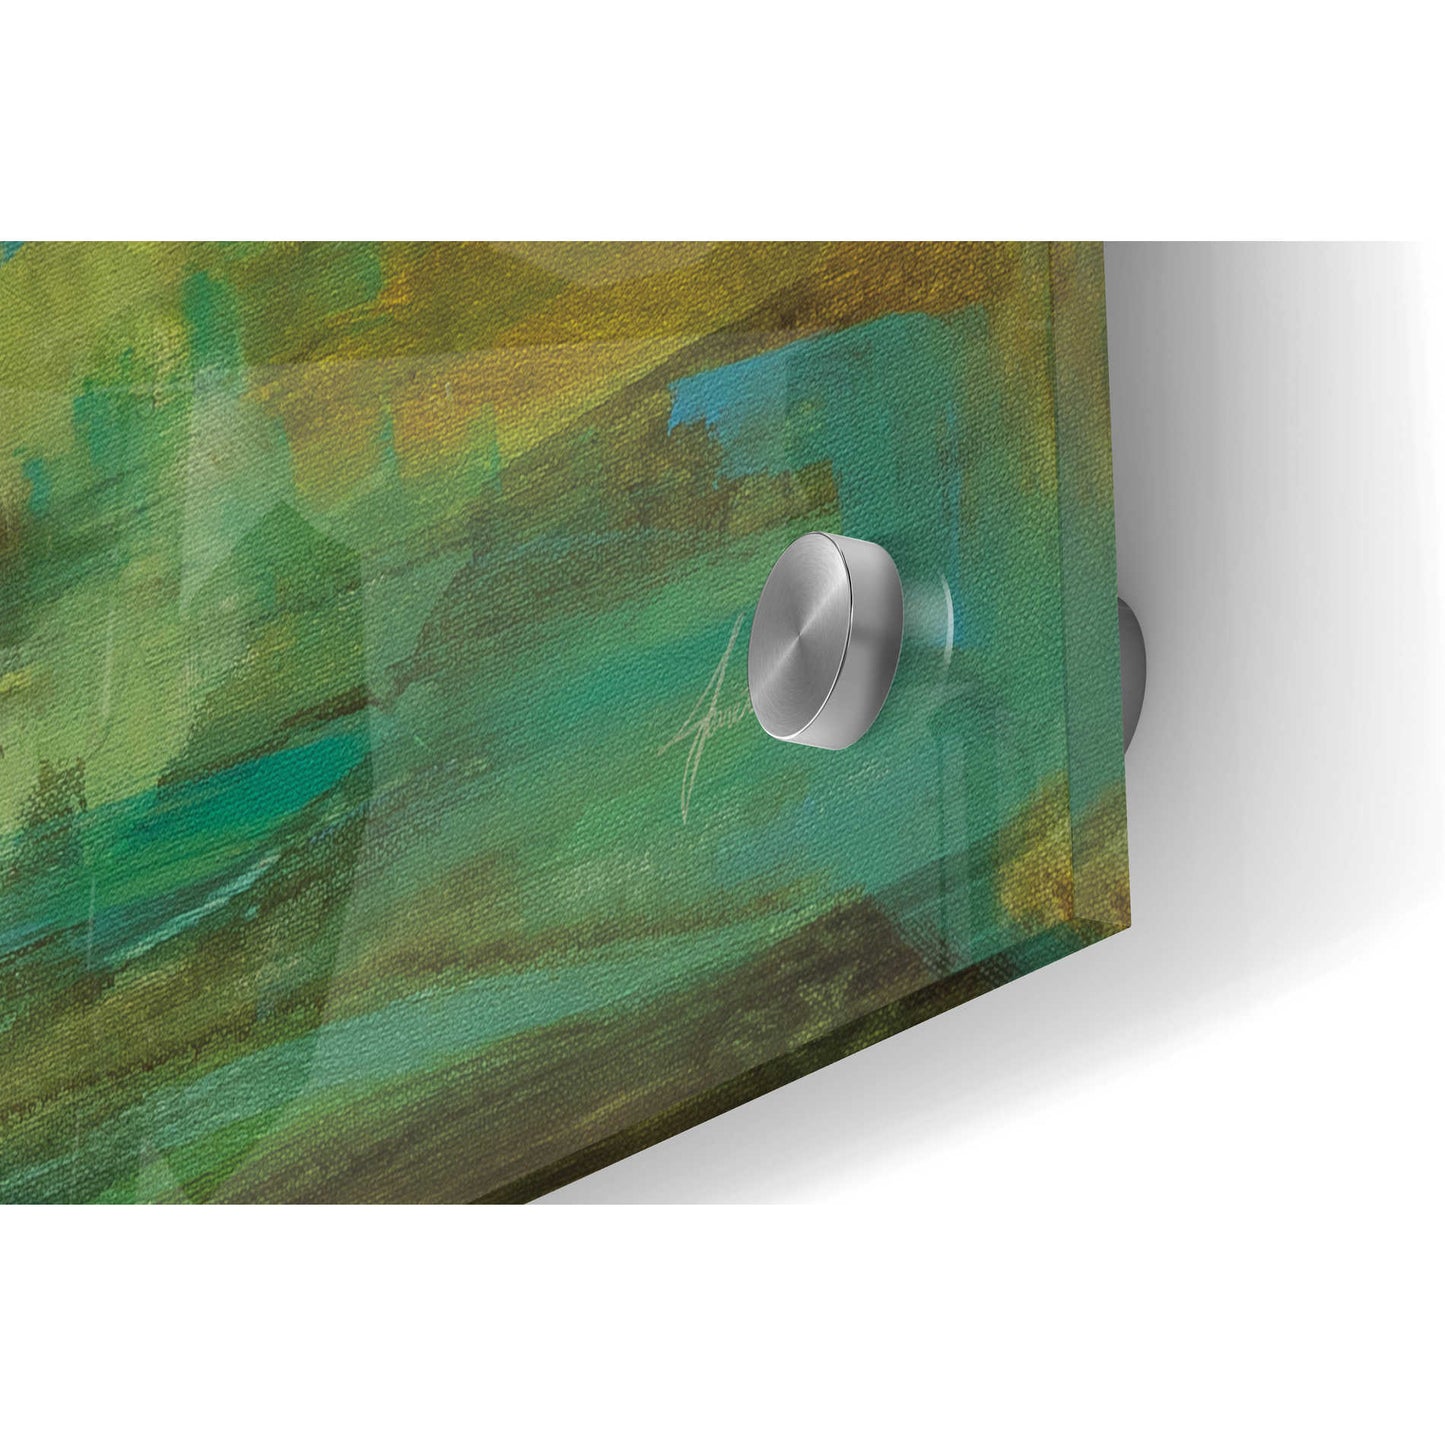 Epic Art 'Calm' by Jeanette Vertentes, Acrylic Glass Wall Art,36x24